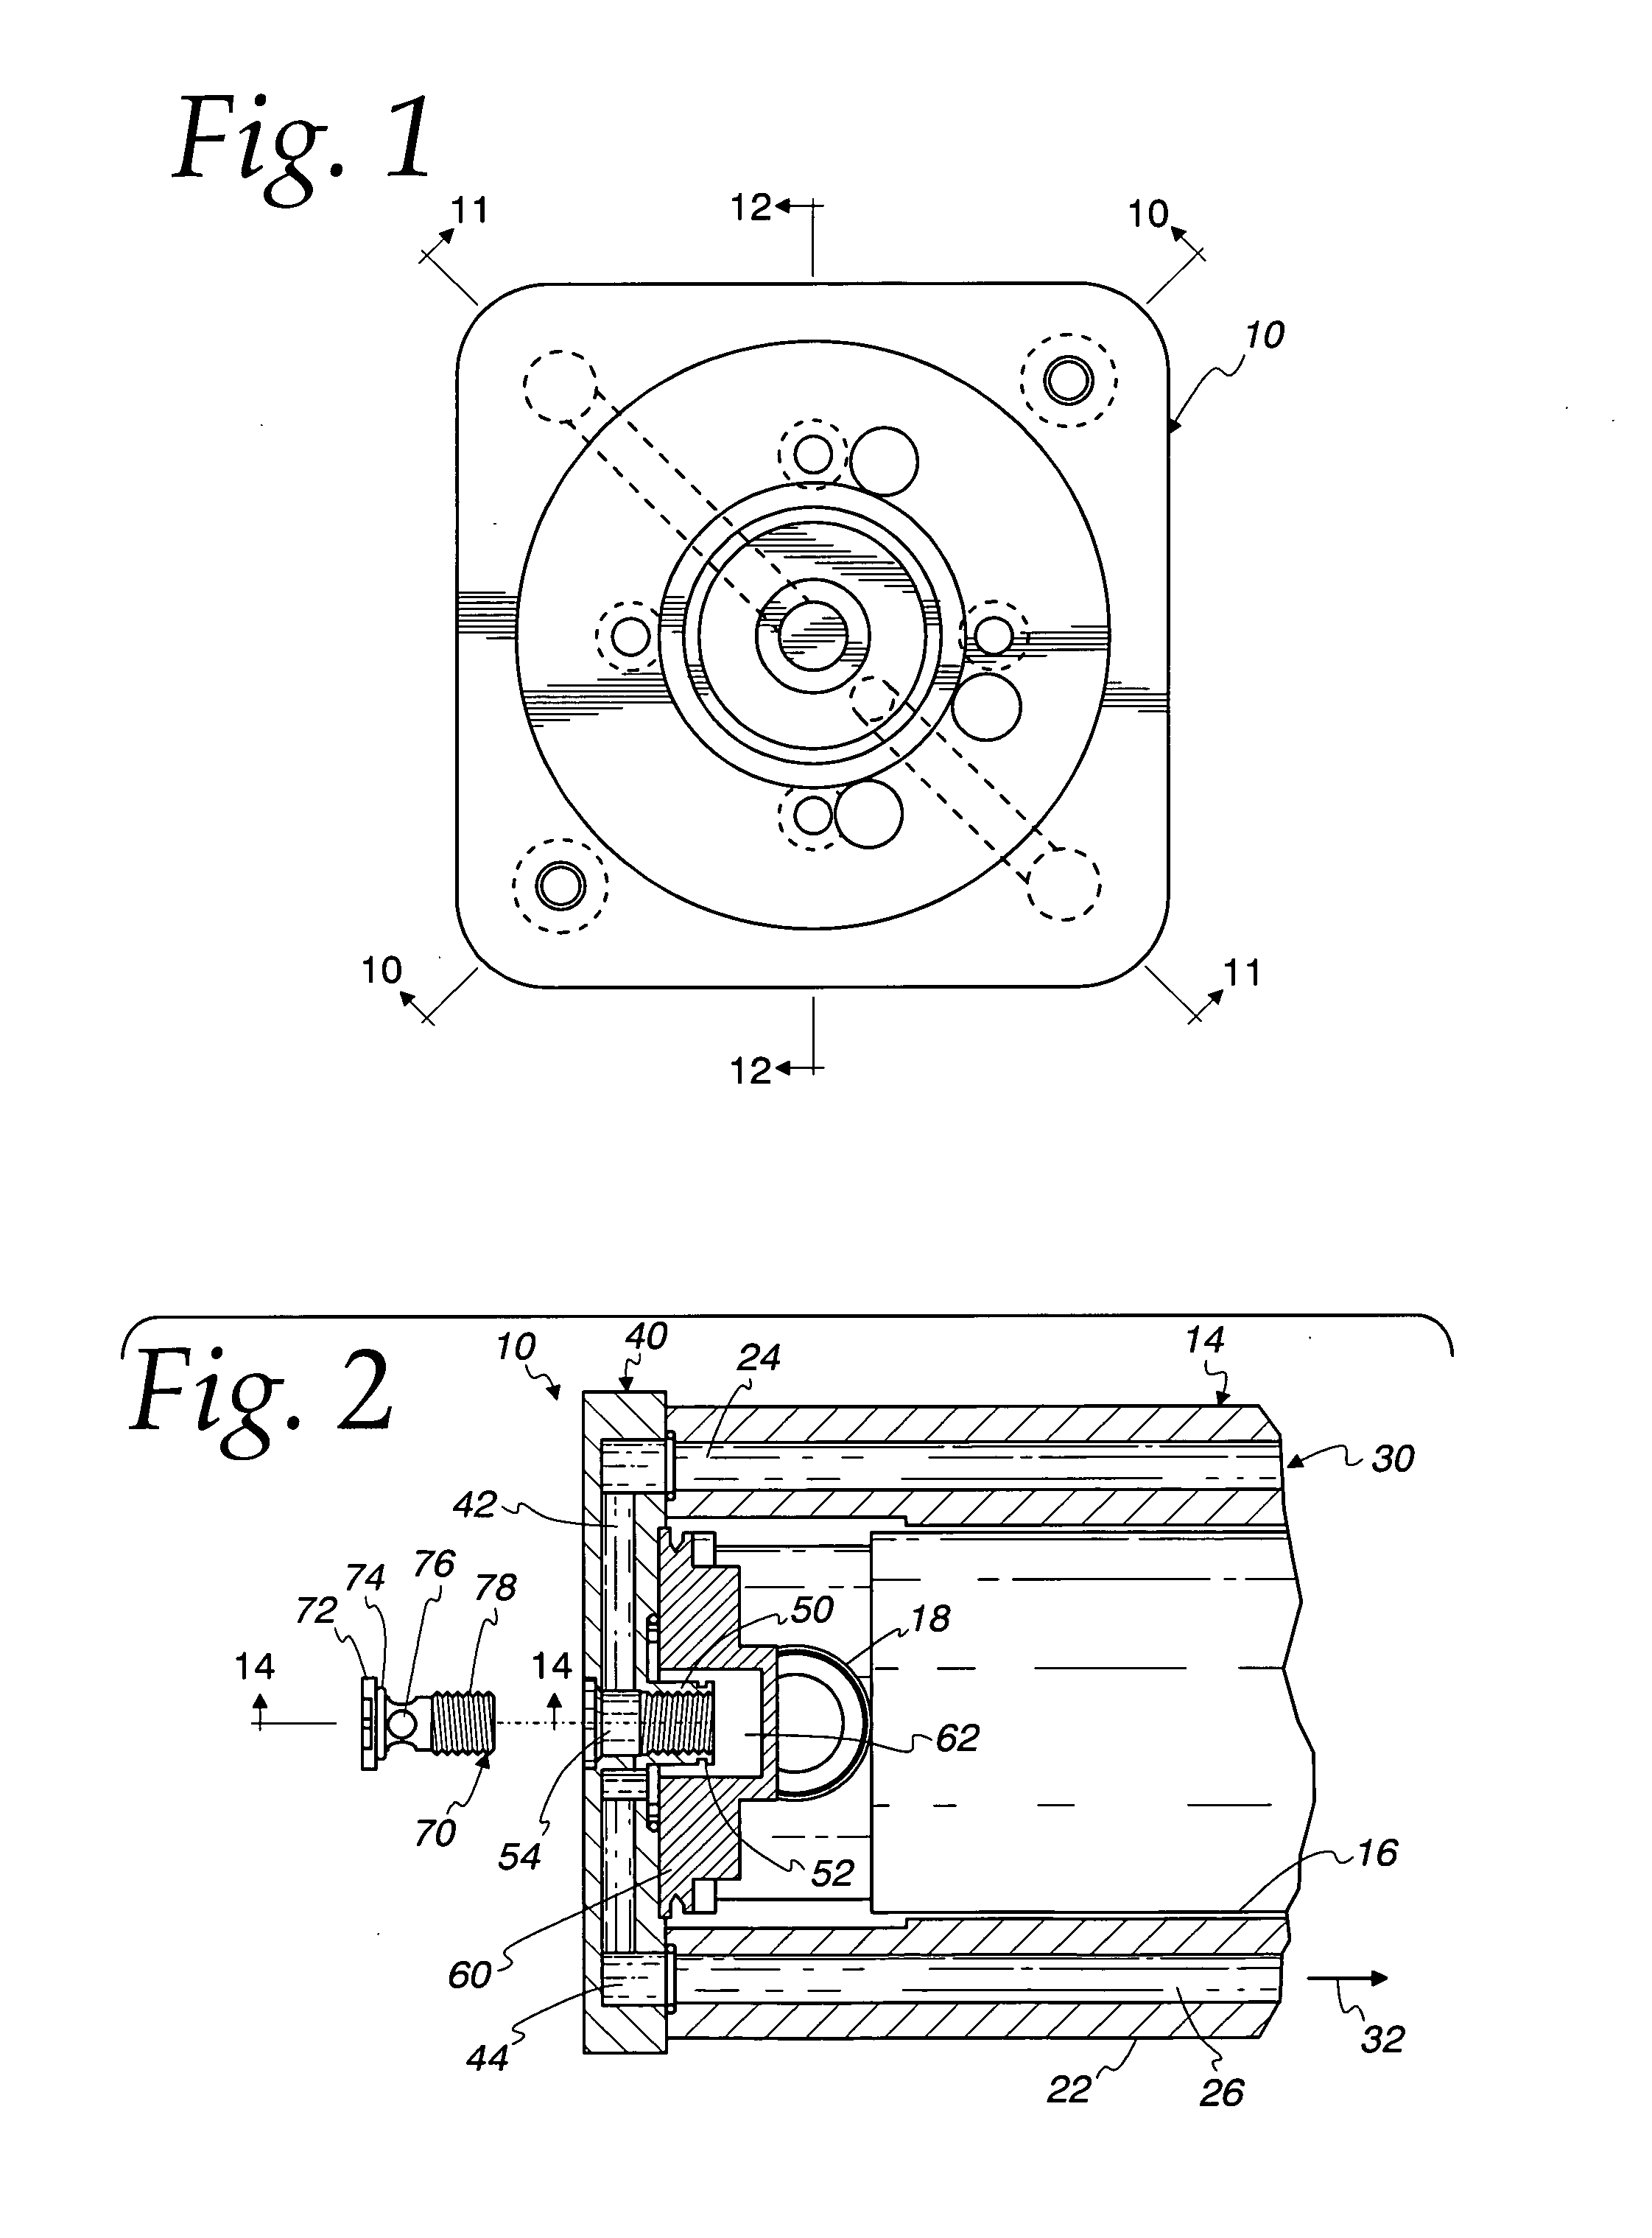 Removable filter holder and method